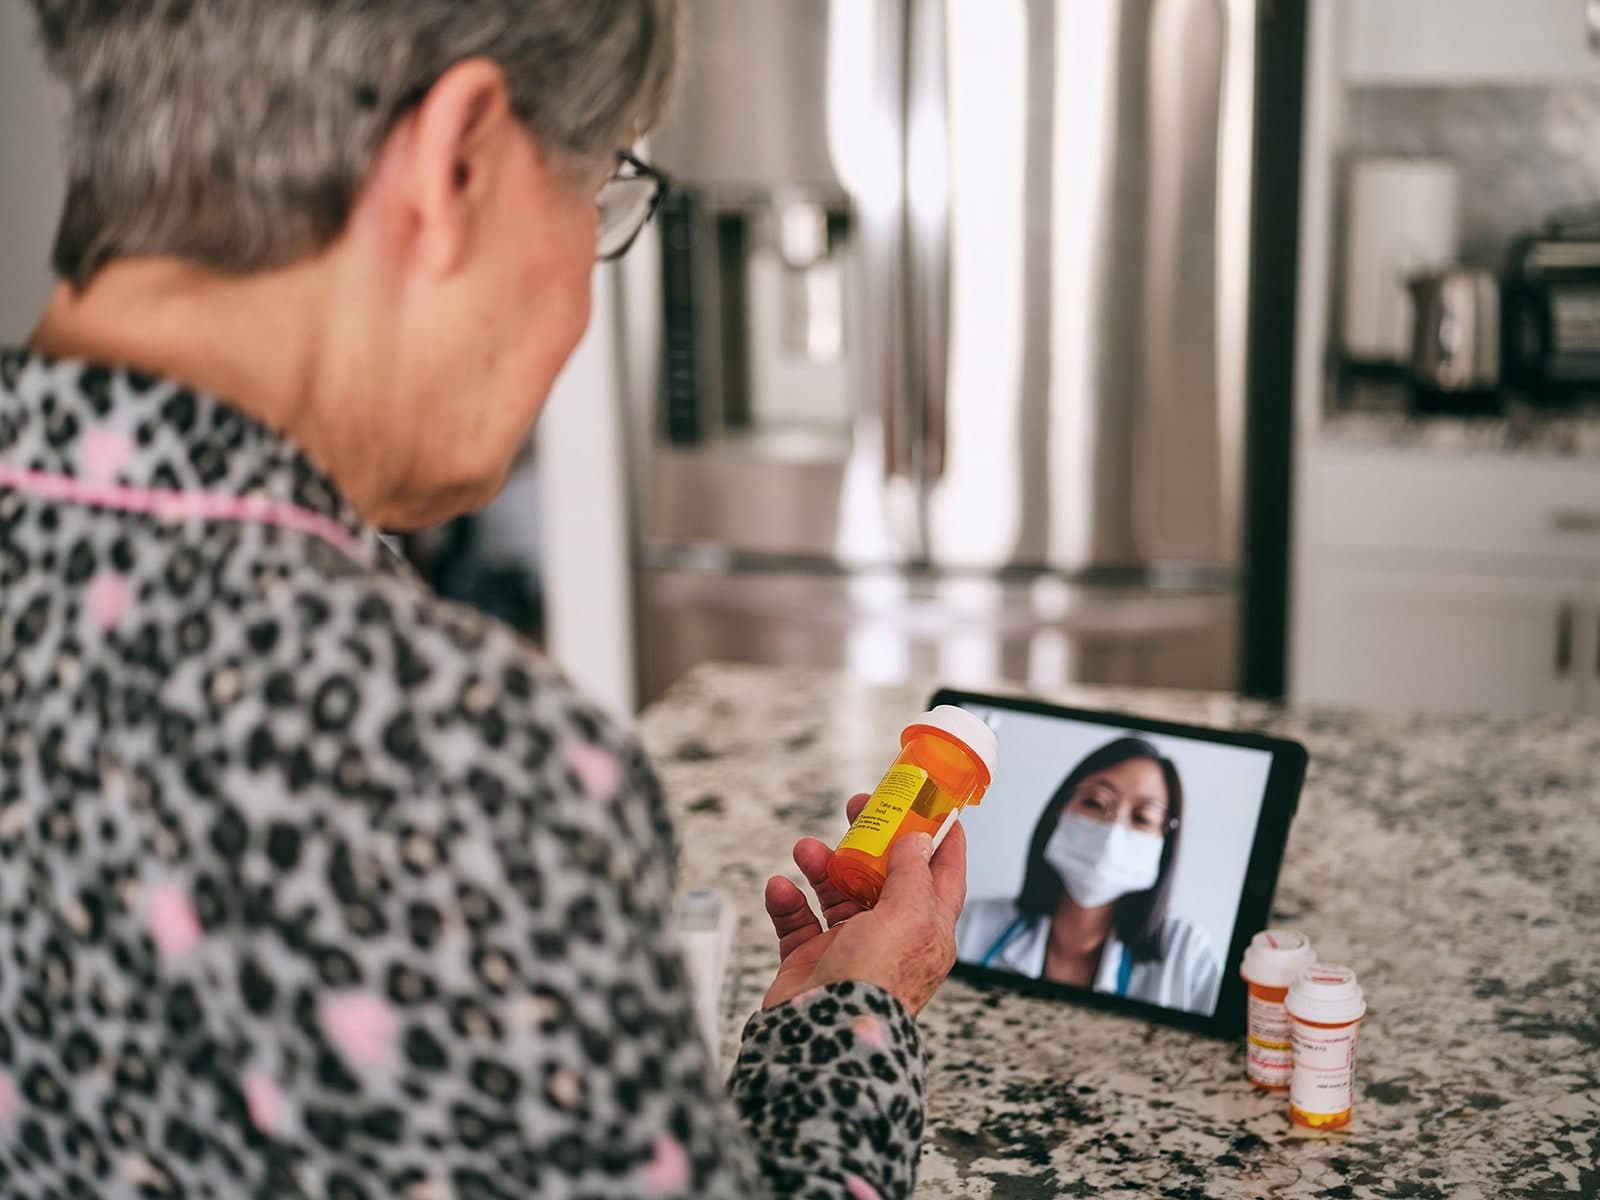 Patient chatting with her doctor via telehealth video